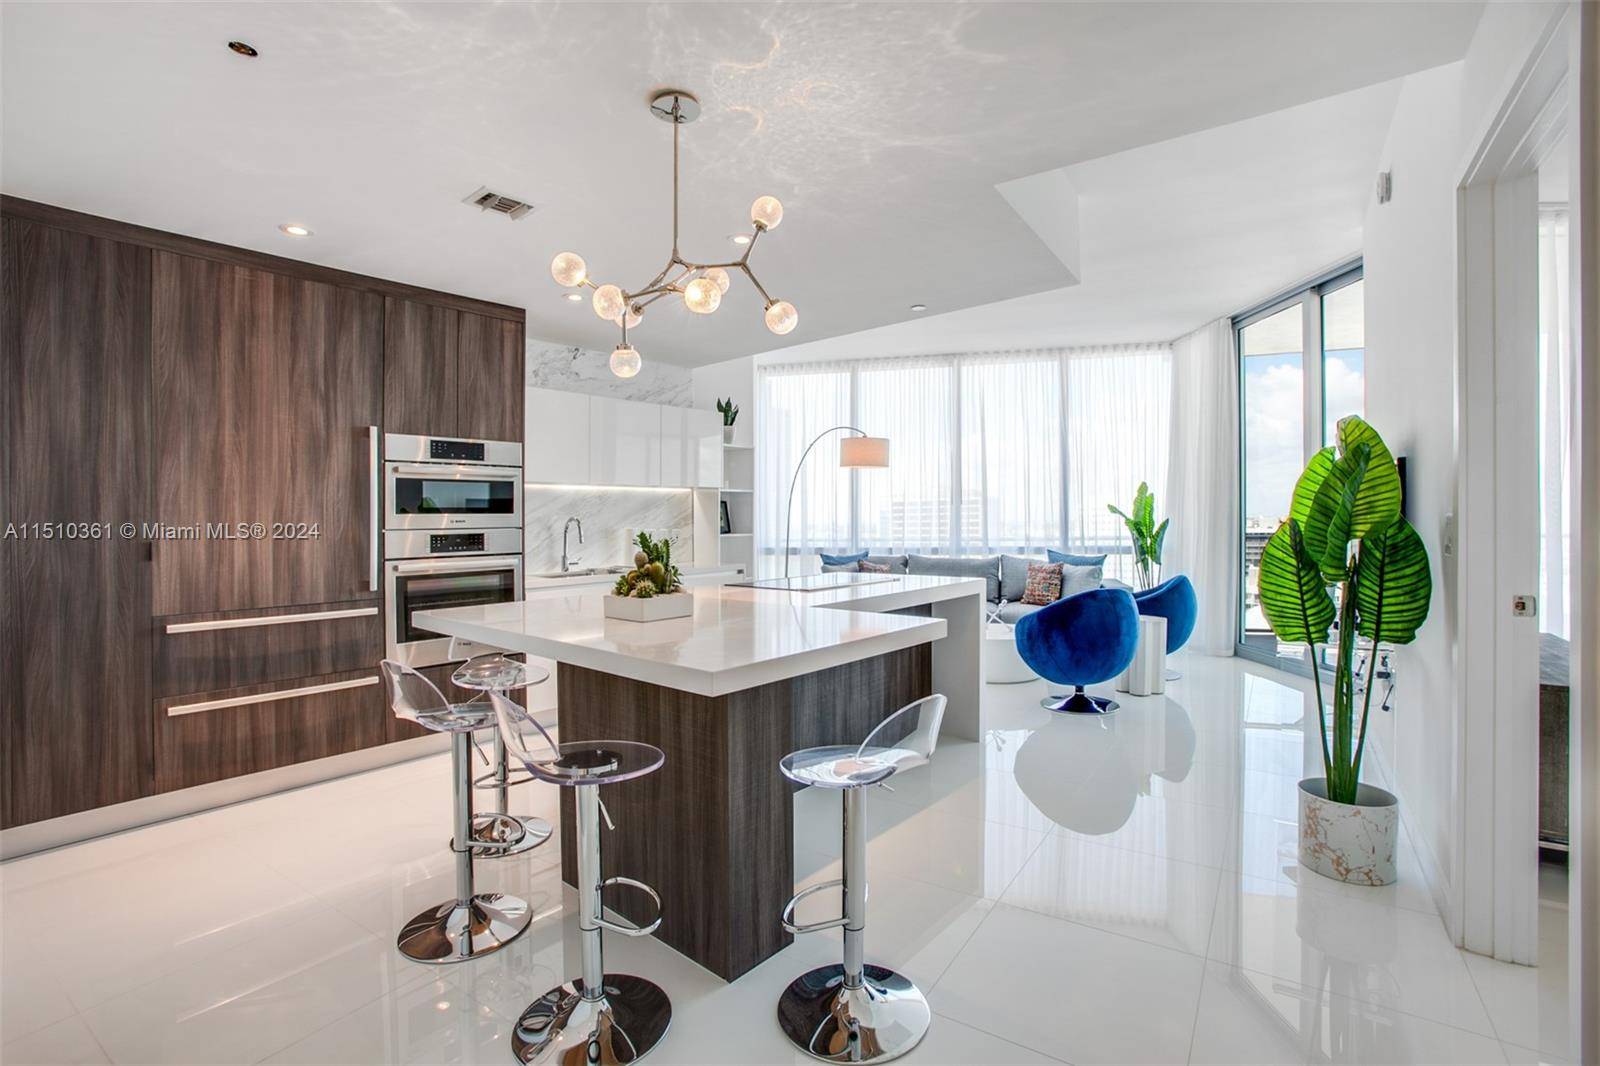 Luxury 1 Bed Den 2 bath Residential Condo at the Miami World Center with 10 Foot ceilings and private elevator entrance right into your exquisitely furnished and designed home by ...